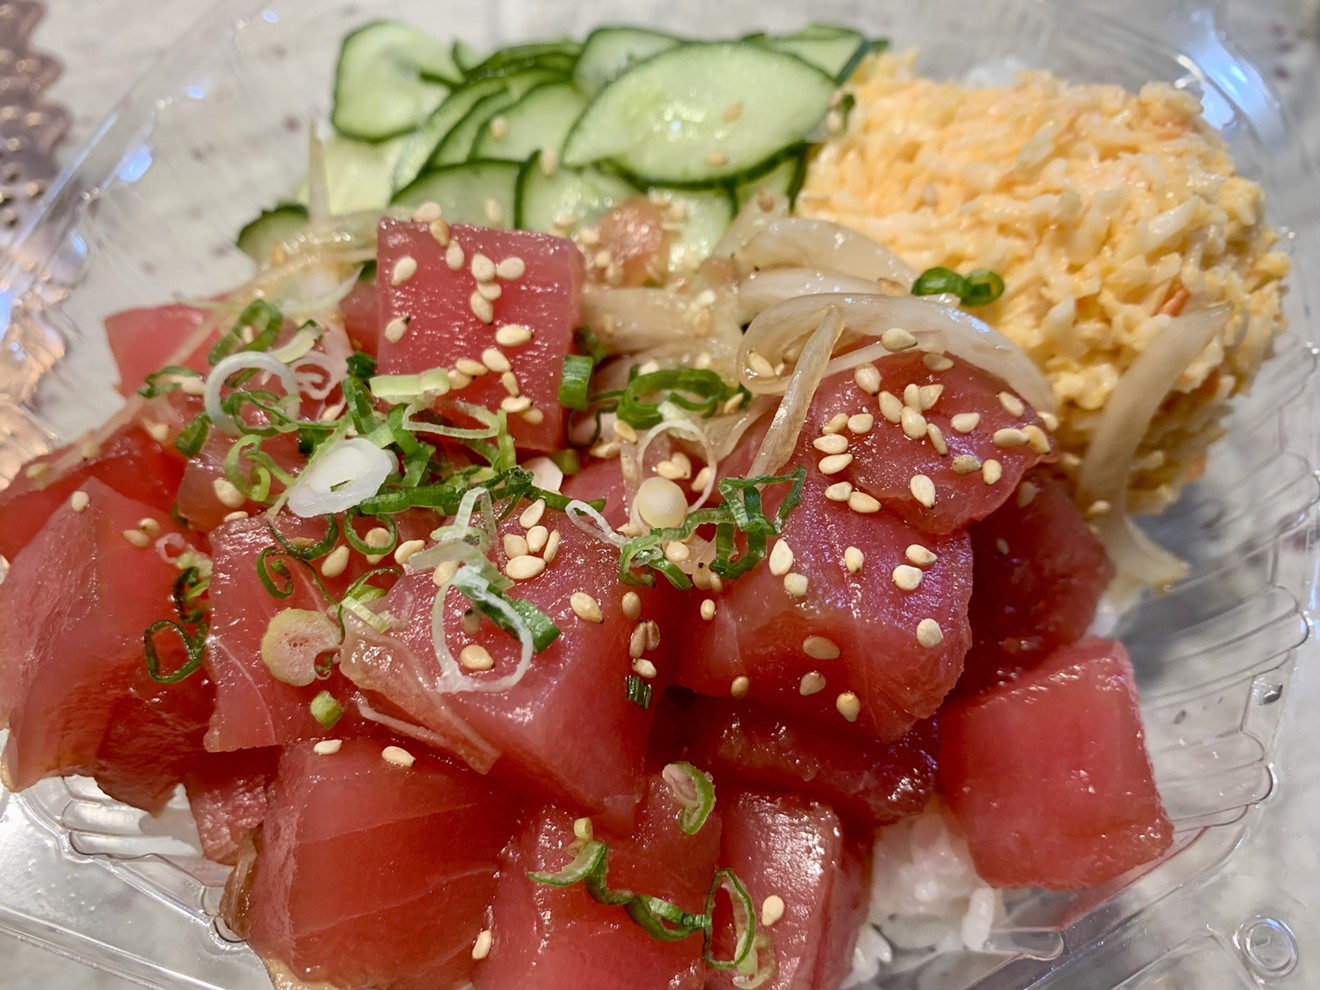 The Hawaiian Poke Bowl at Sushi Friend makes for a satisfying lunch.